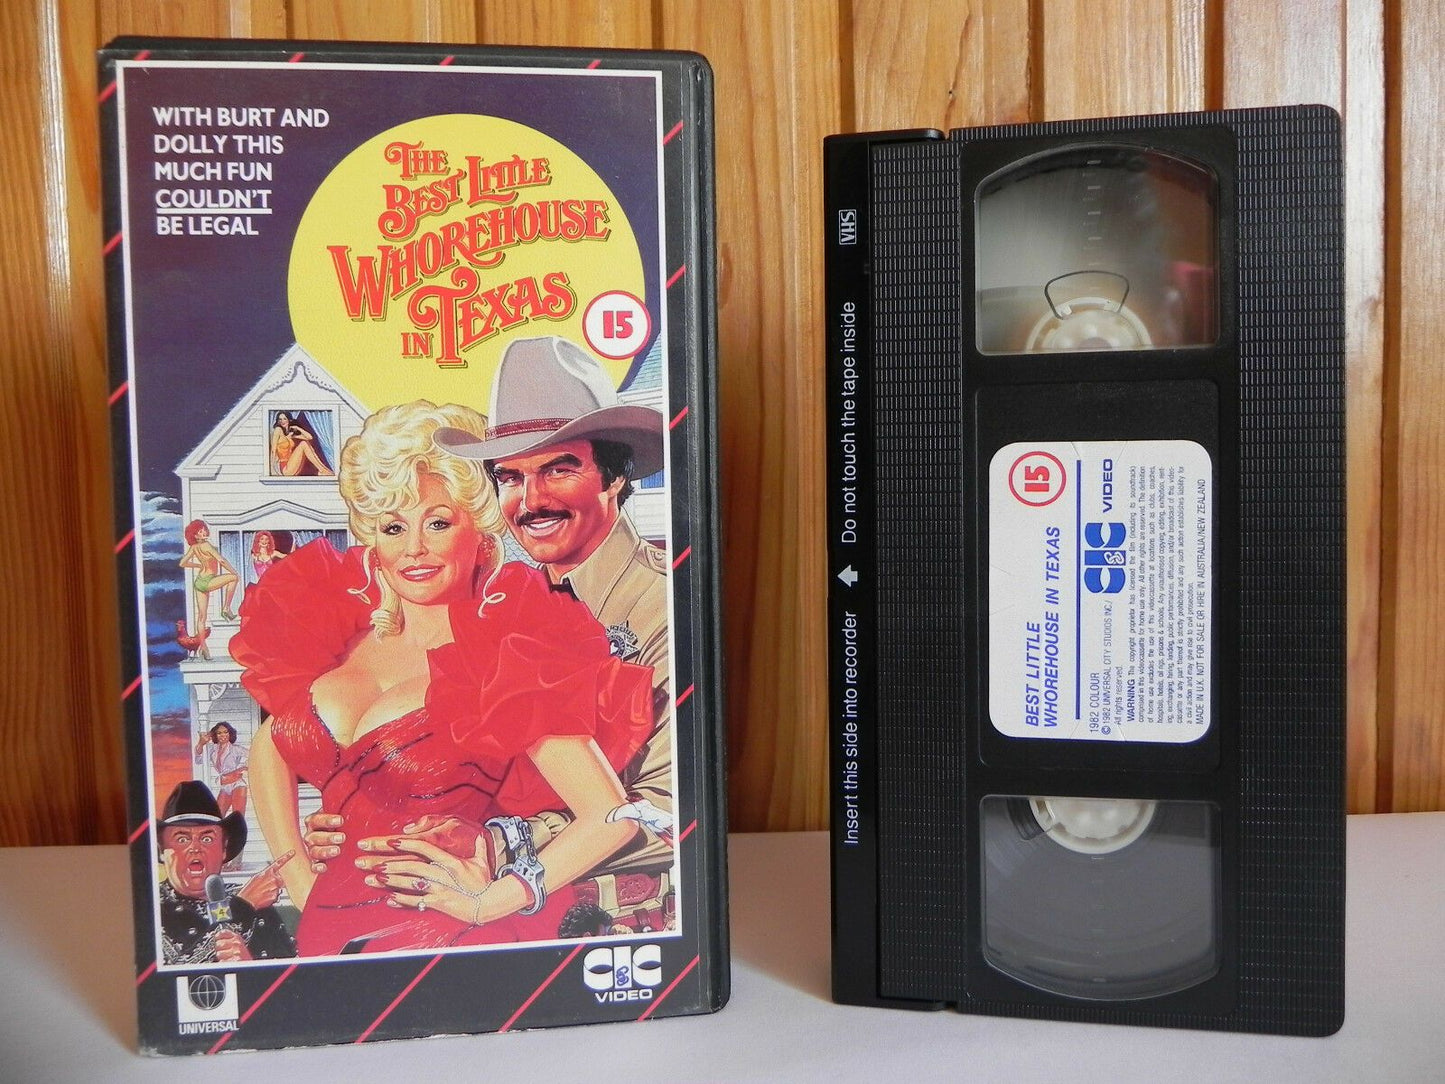 The Best Little Whorehouse In Texas - Dolly Parton - CIC Pre-Cert Film - Pal VHS-